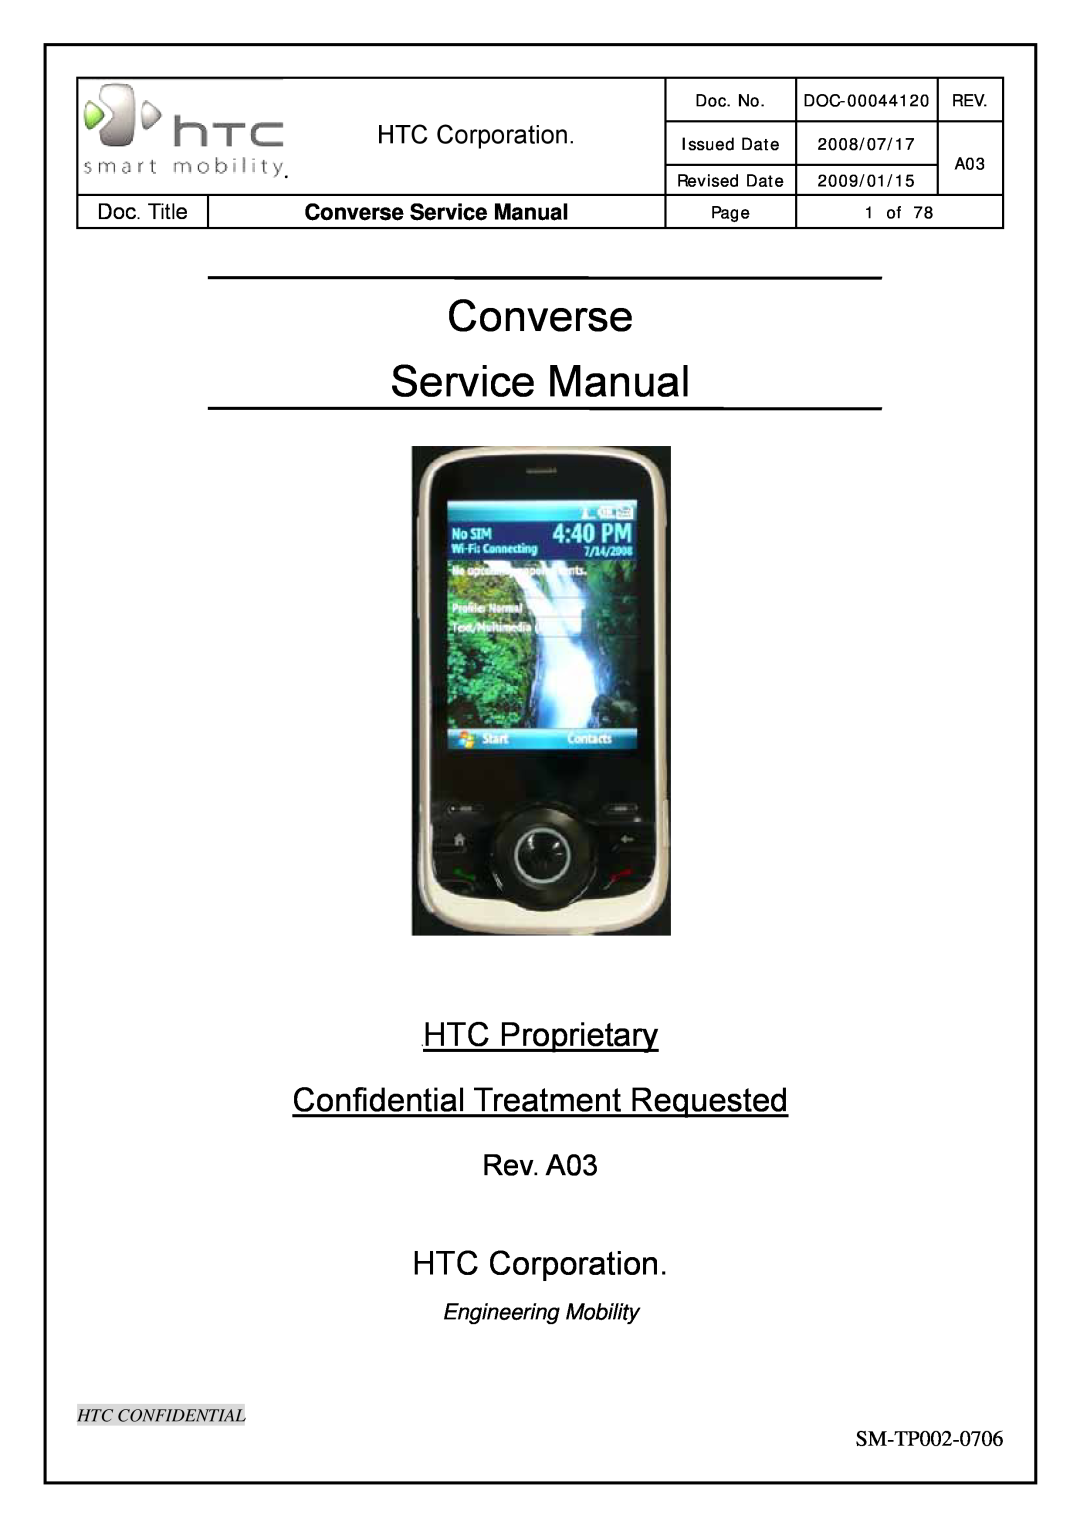 HTC SM-TP002-0706 service manual HTC Corporation, Converse Service Manual, Rev. A03, Engineering Mobility, Doc. No, 1 of 